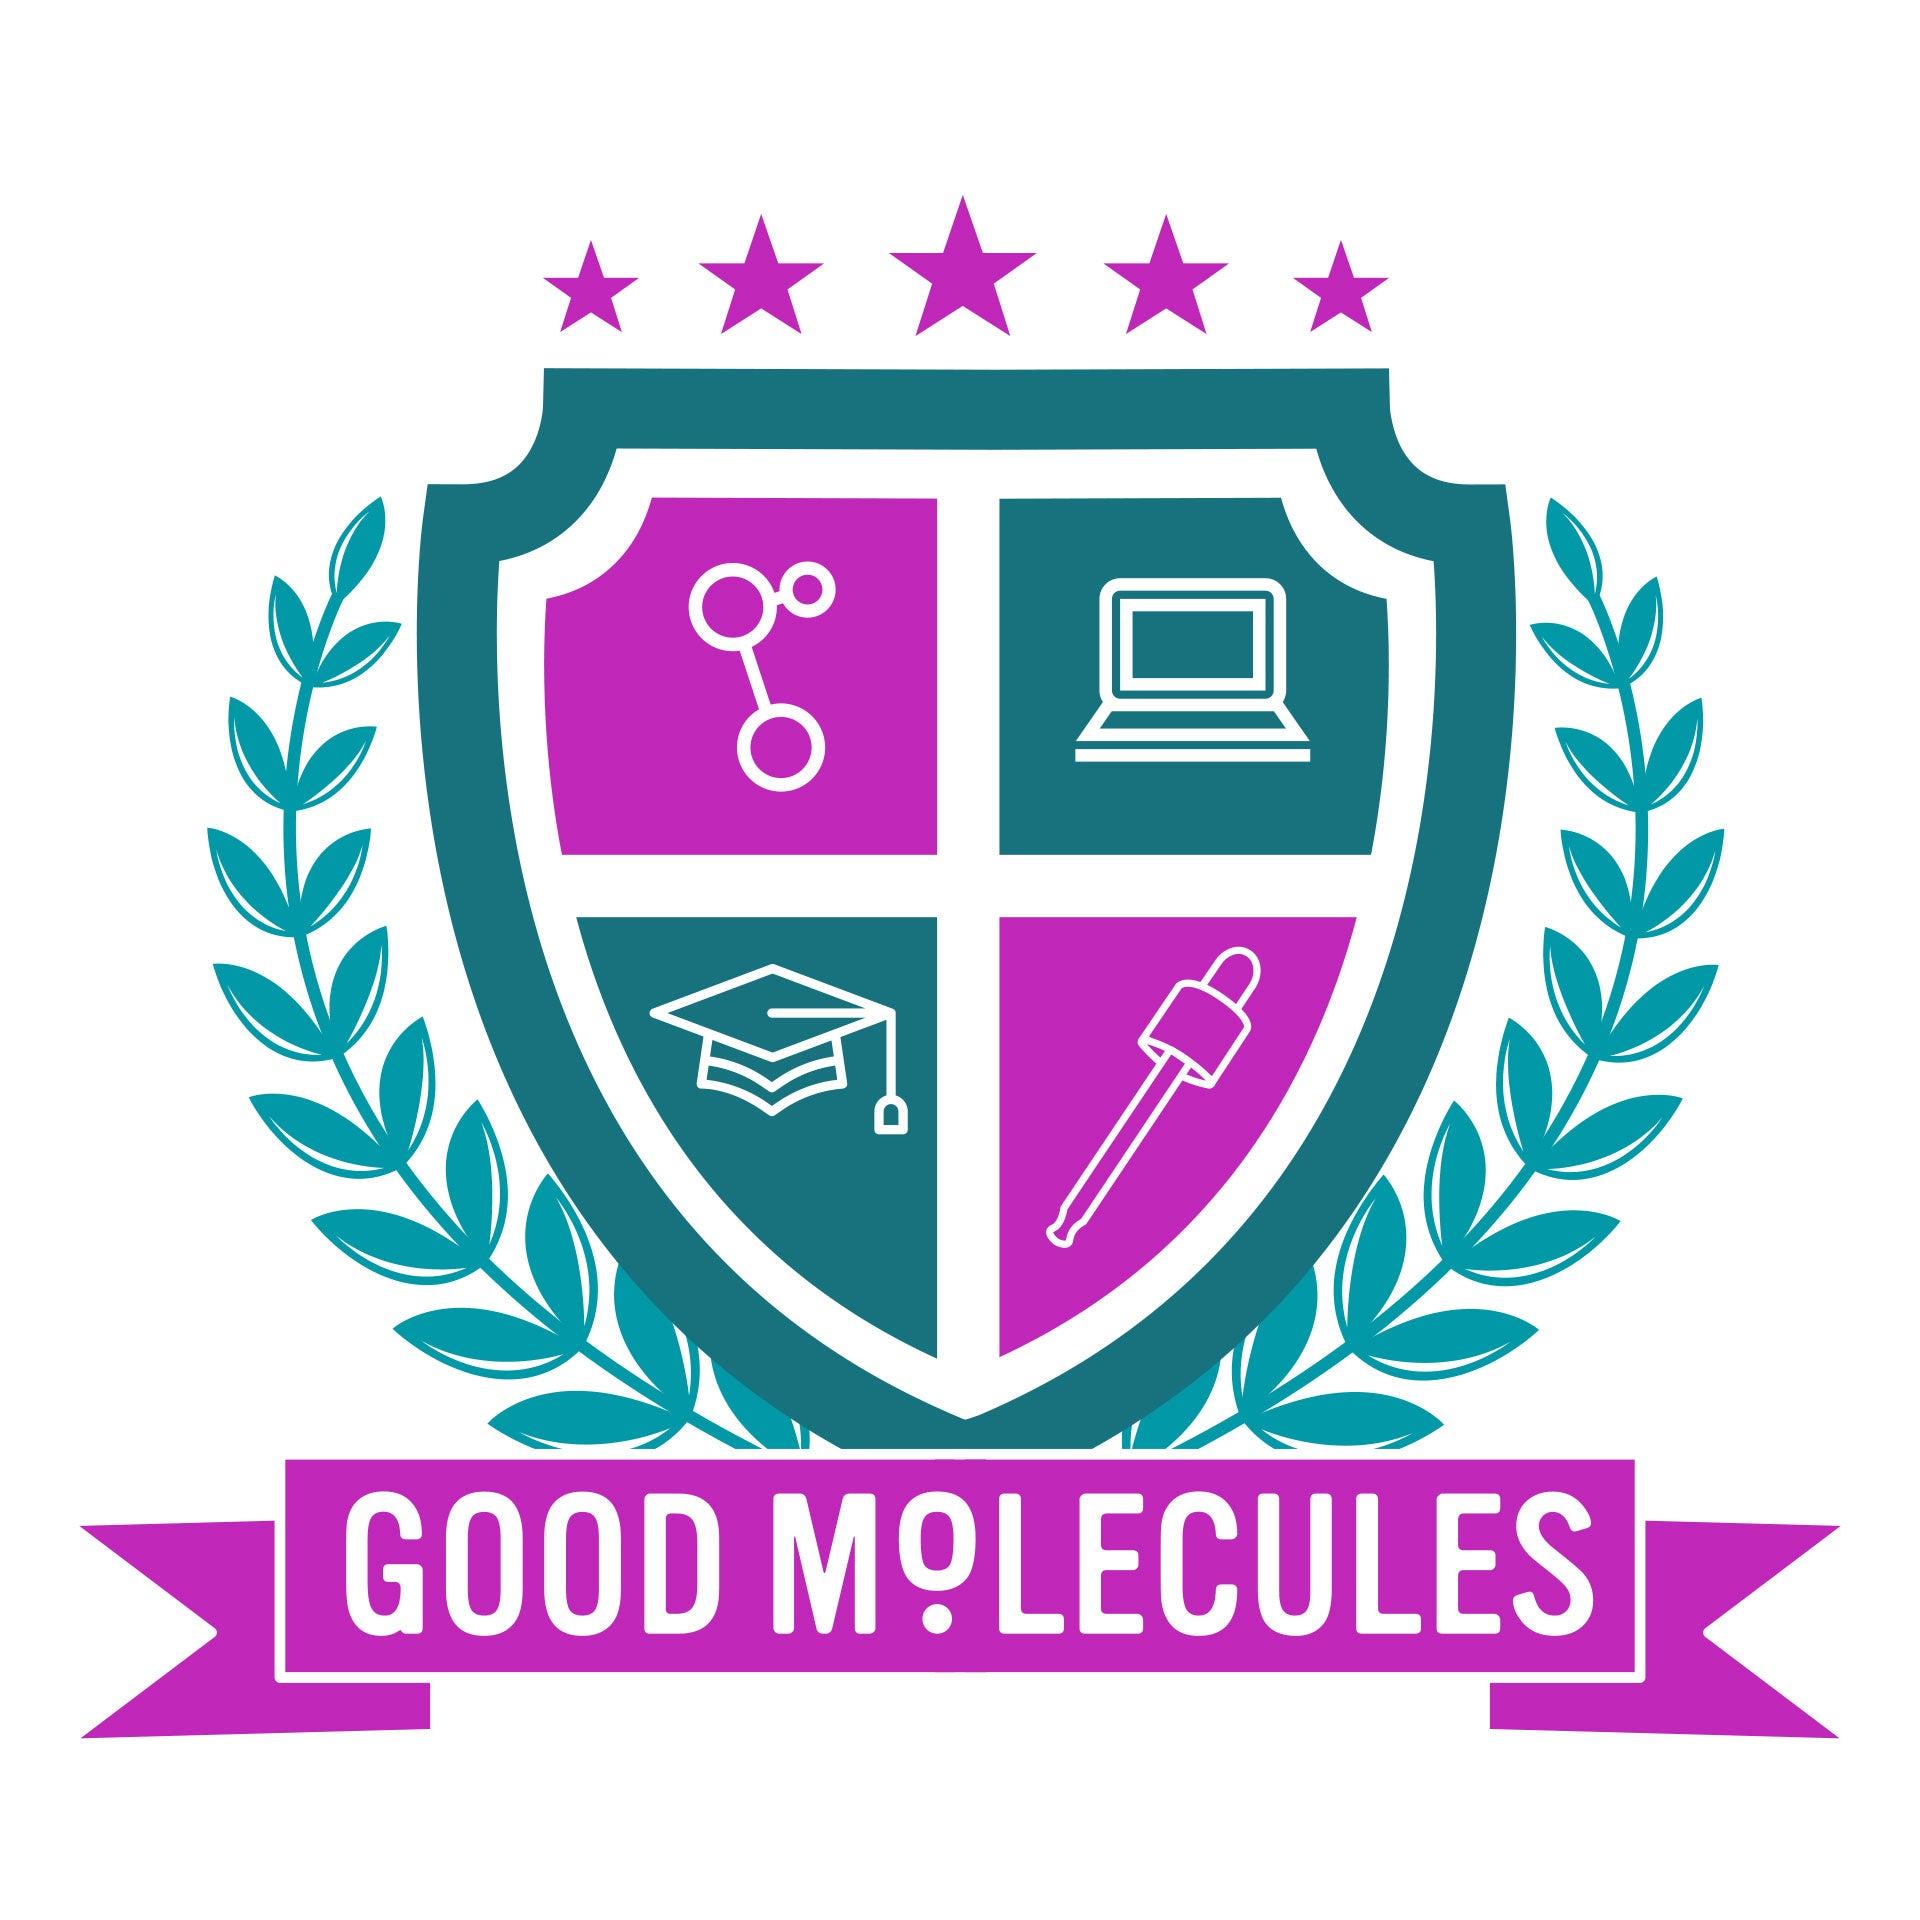 Good Molecules is coming to Duke University!